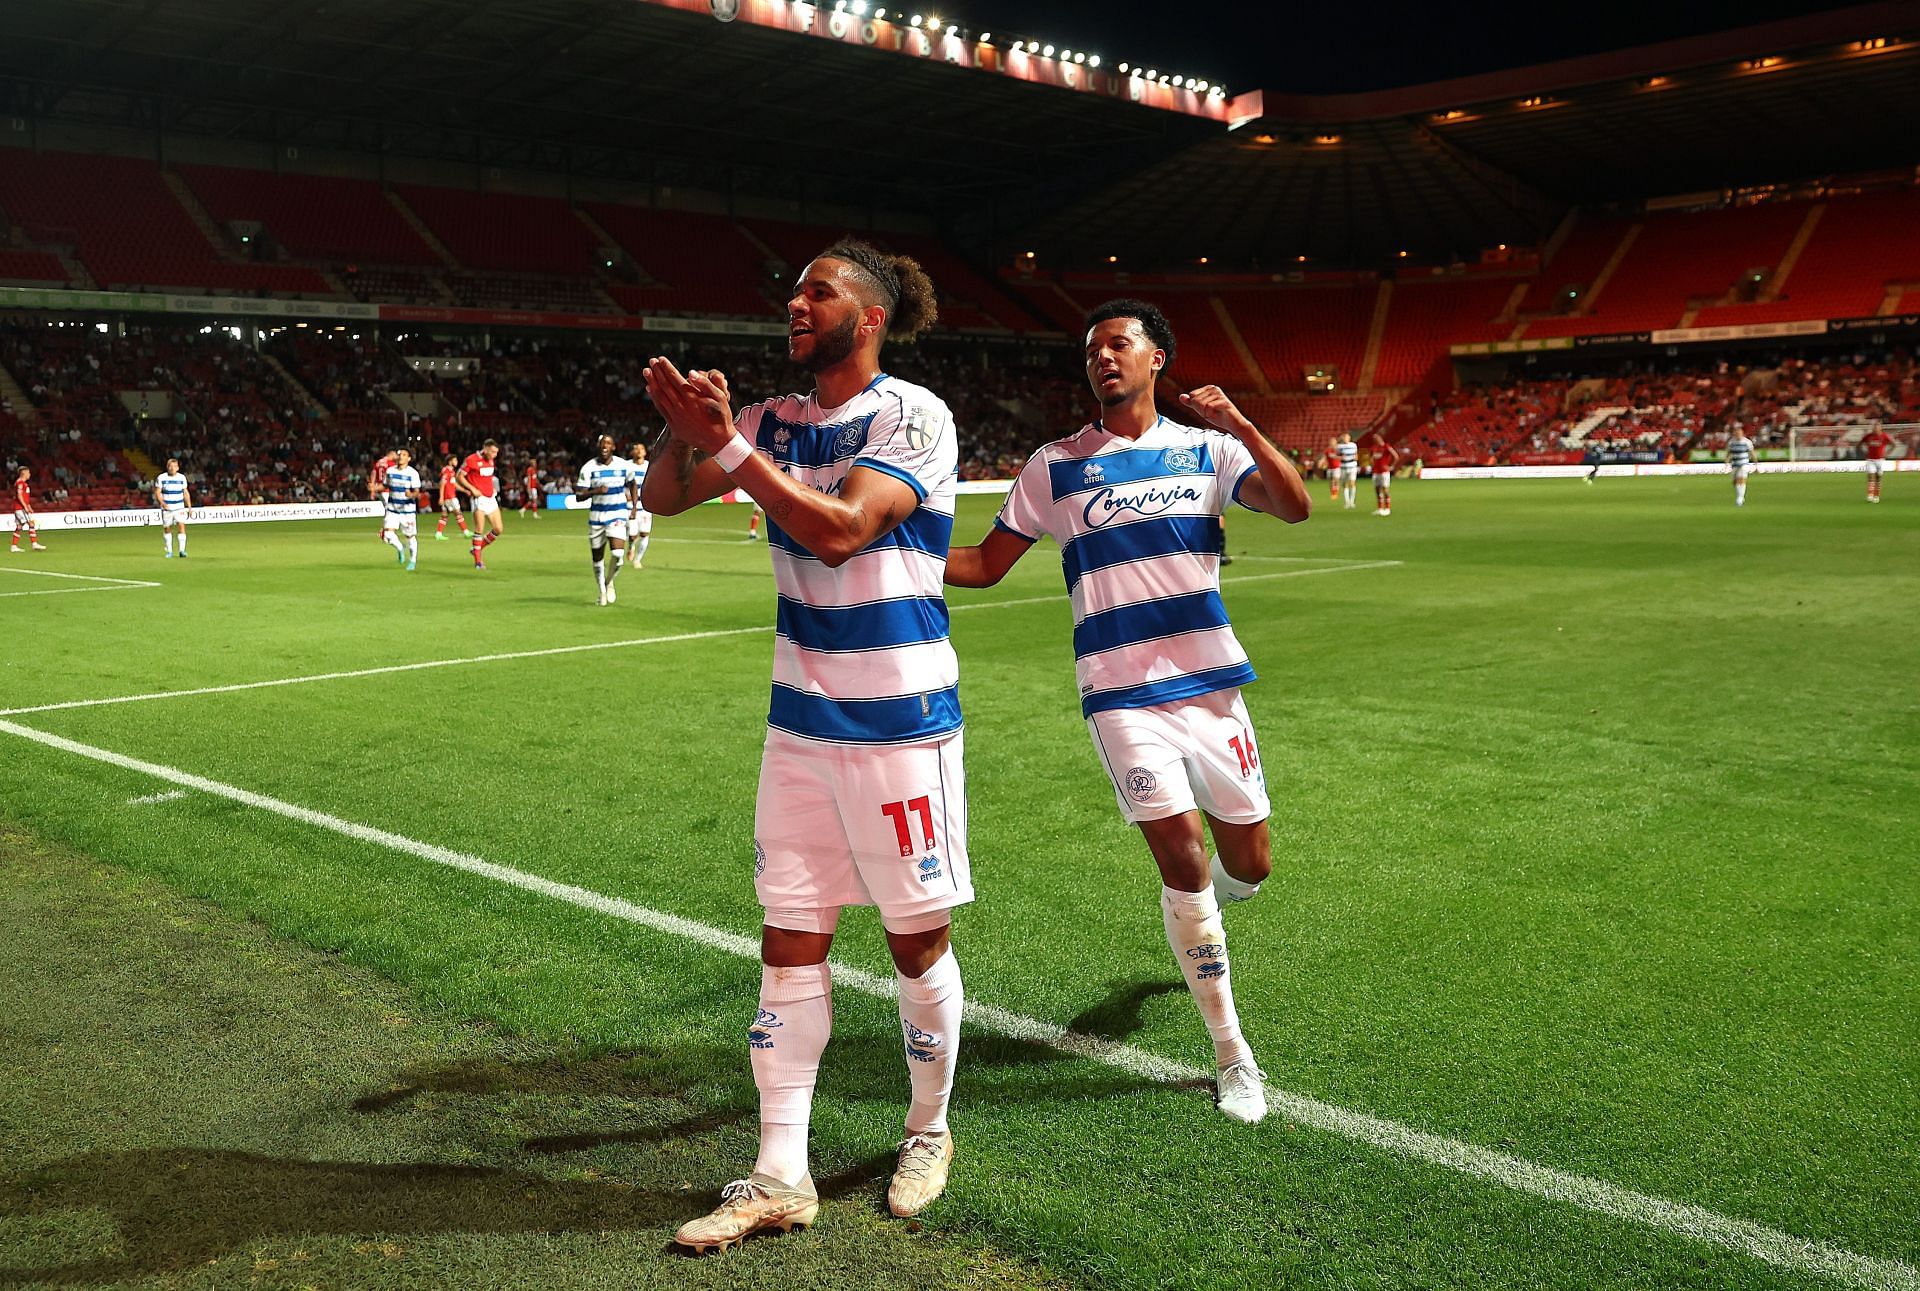 QPR will be looking to win the game on Saturday